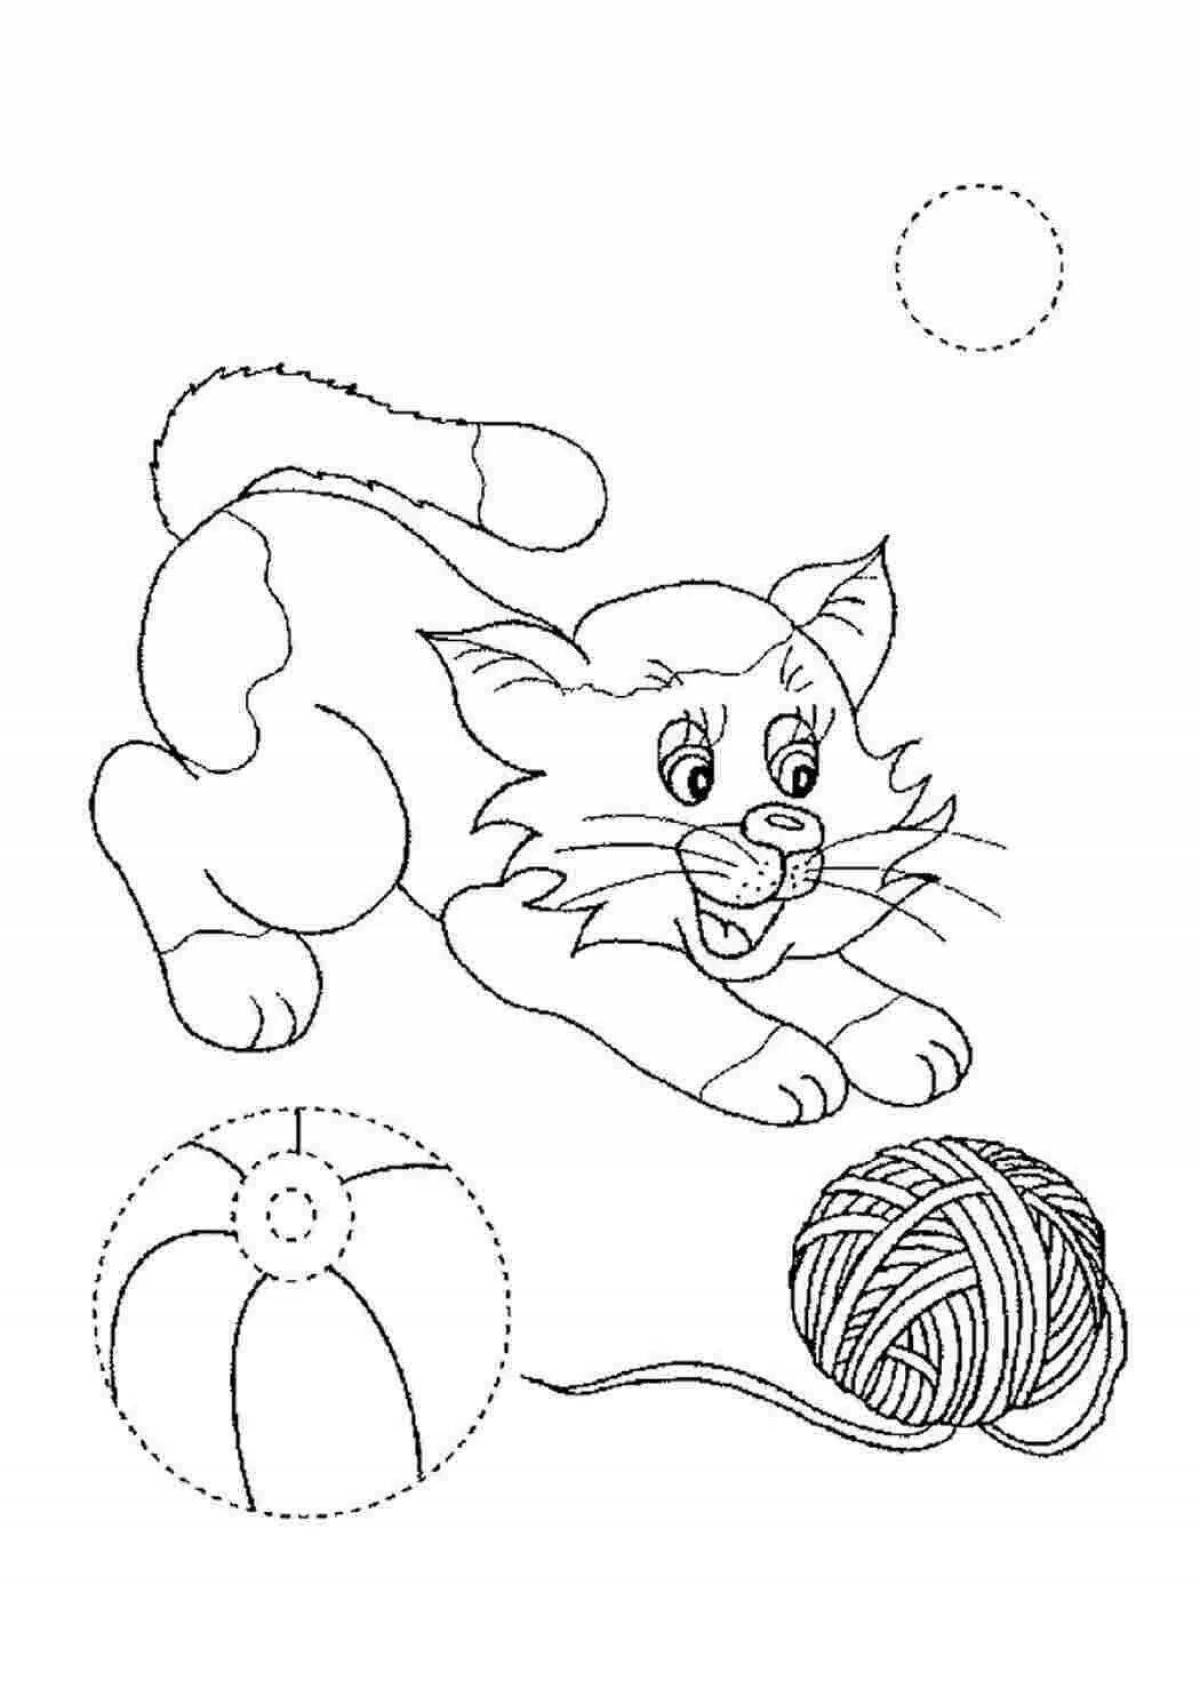 Adorable ball coloring page for kids